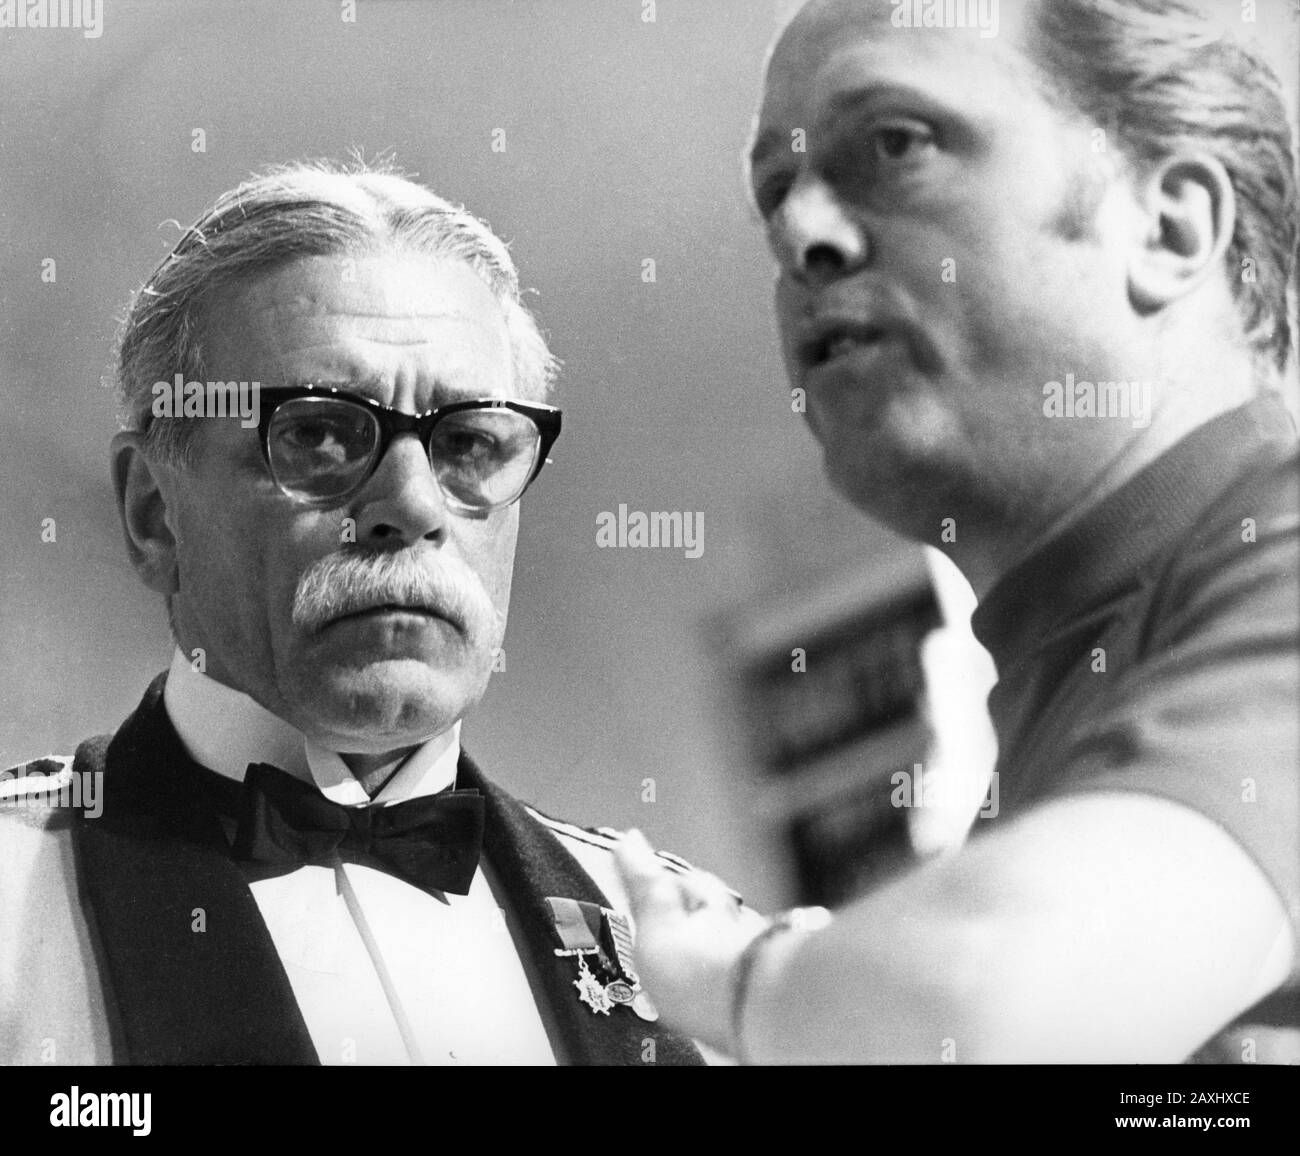 LAURENCE OLIVIER in costume as Field Marshall Sir John French and Director RICHARD ATTENBOROUGH on set candid filming OH ! WHAT A LOVELY WAR 1969 based on Joan Littlewood's Theatre Workshop Production Accord Productions / Paramount British Pictures Stock Photo